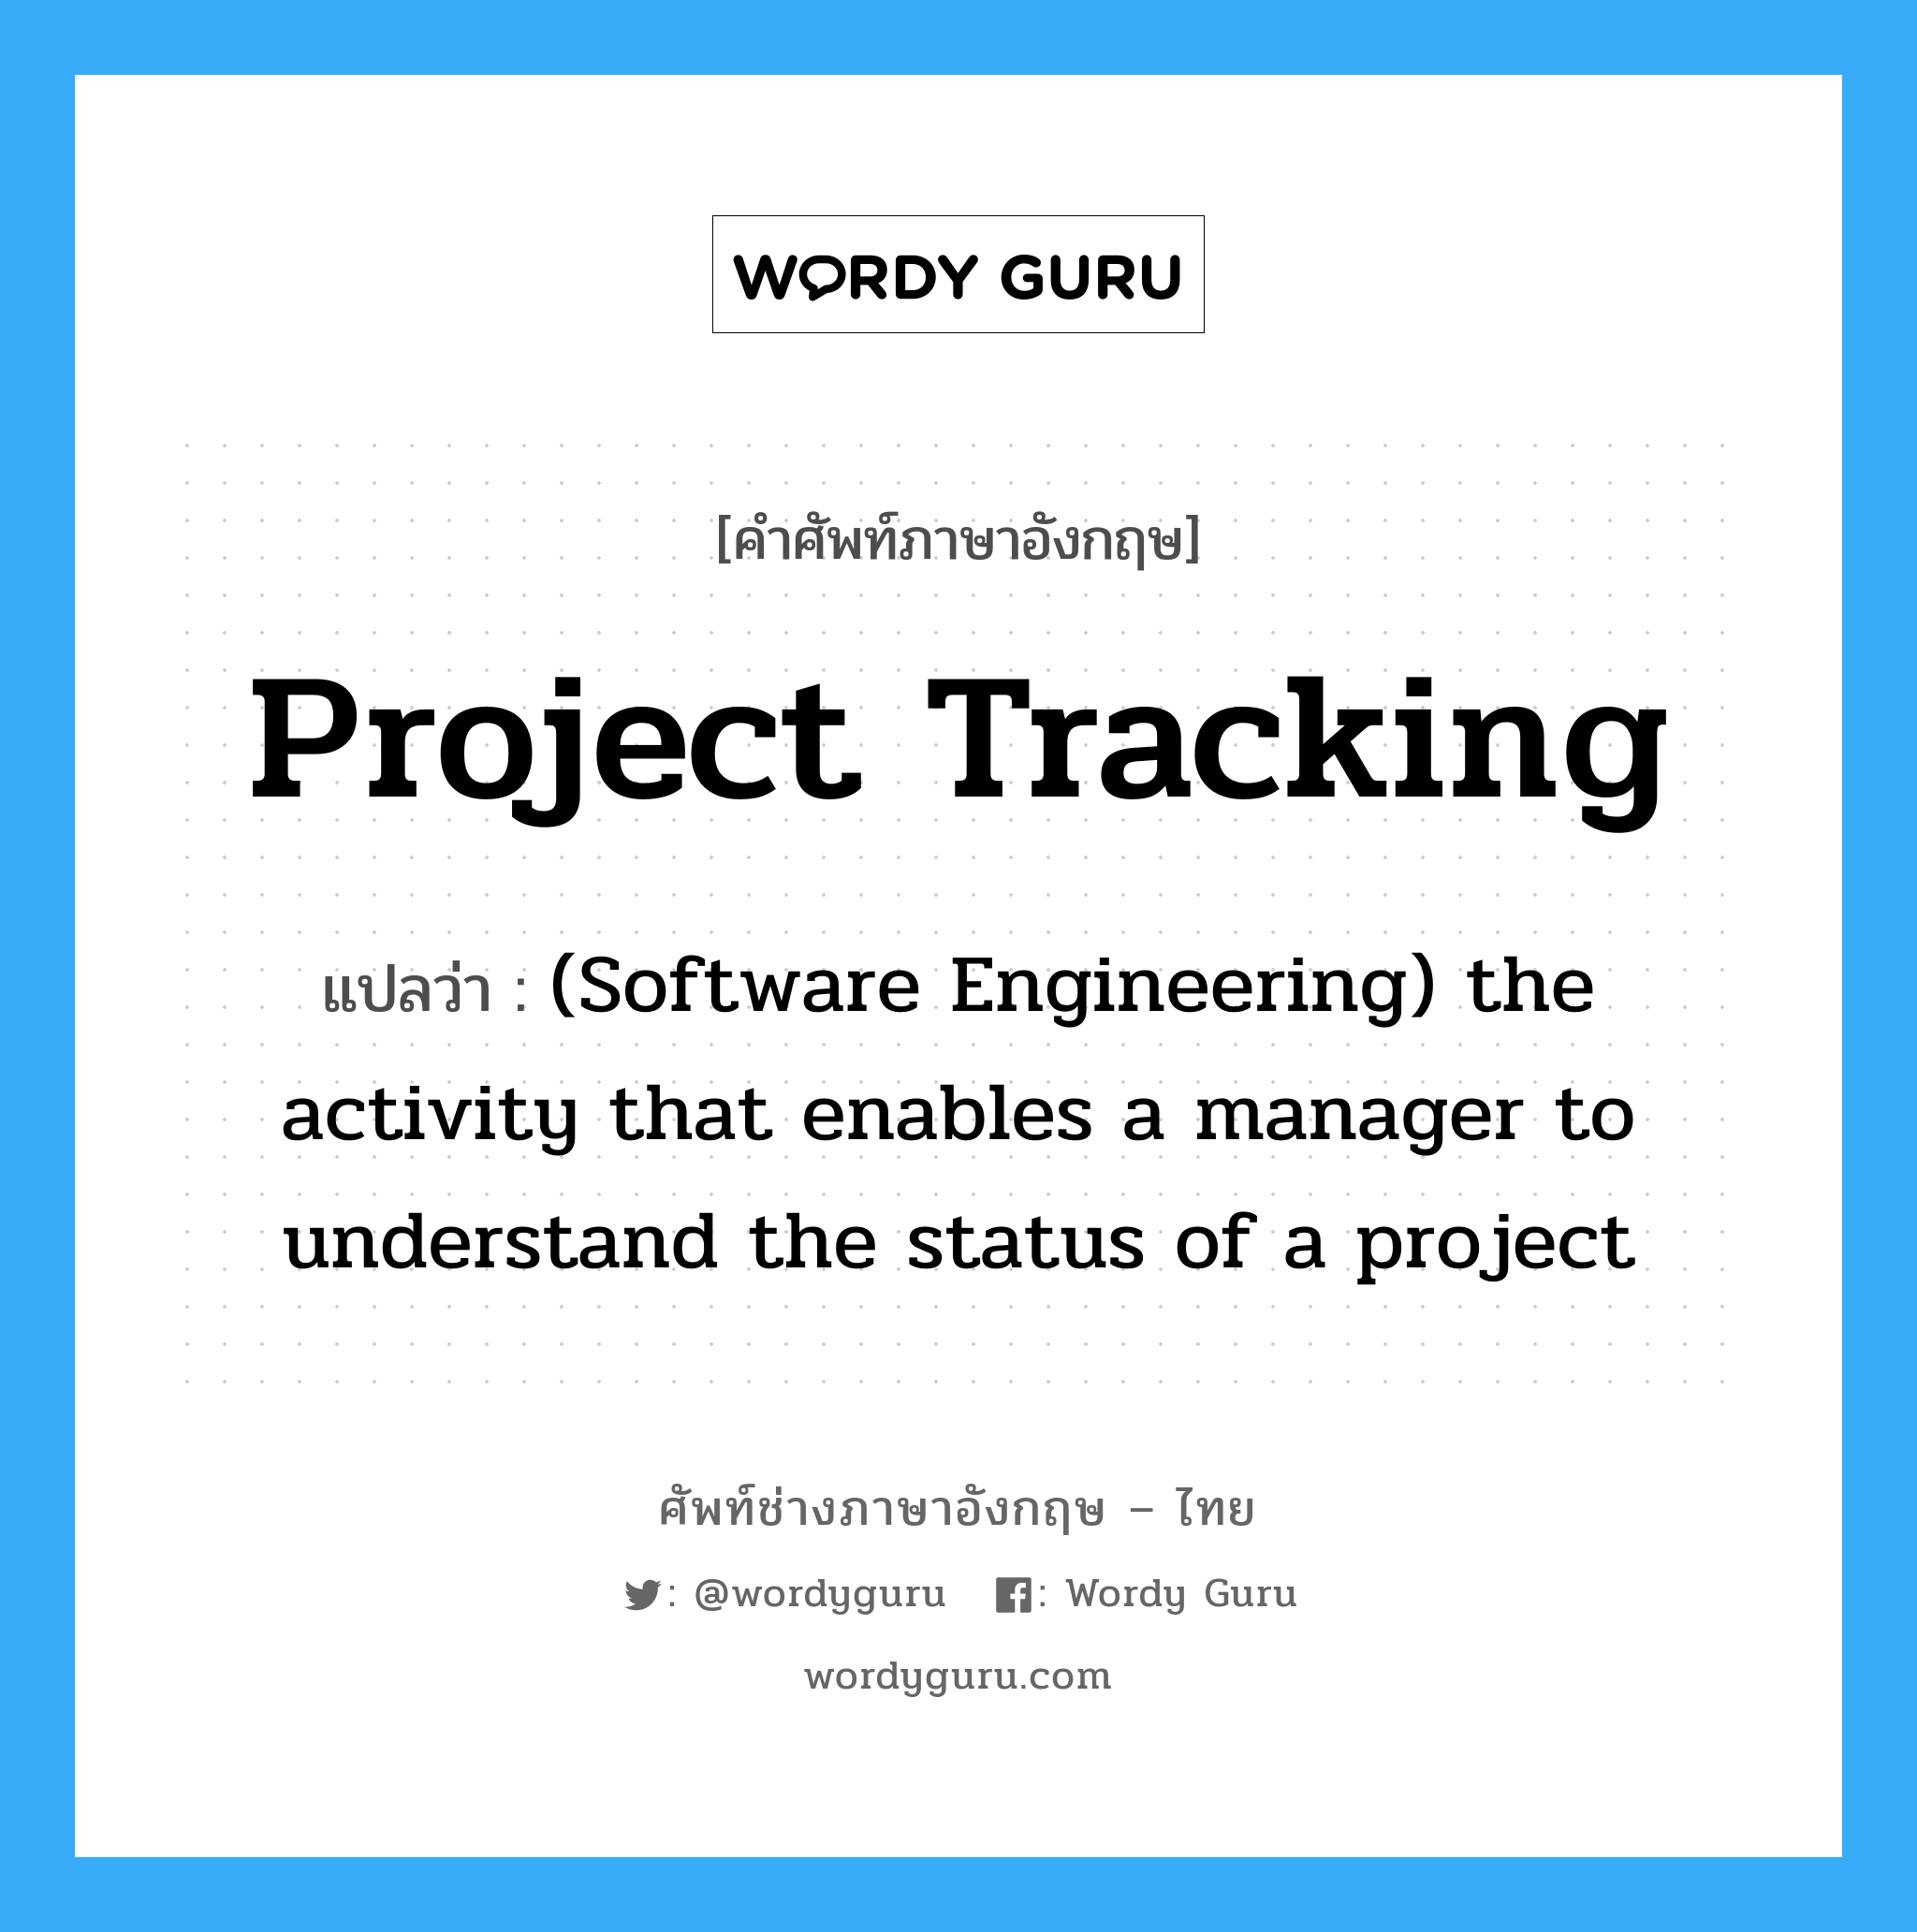 (Software Engineering) the activity that enables a manager to understand the status of a project ภาษาอังกฤษ?, คำศัพท์ช่างภาษาอังกฤษ - ไทย (Software Engineering) the activity that enables a manager to understand the status of a project คำศัพท์ภาษาอังกฤษ (Software Engineering) the activity that enables a manager to understand the status of a project แปลว่า Project tracking